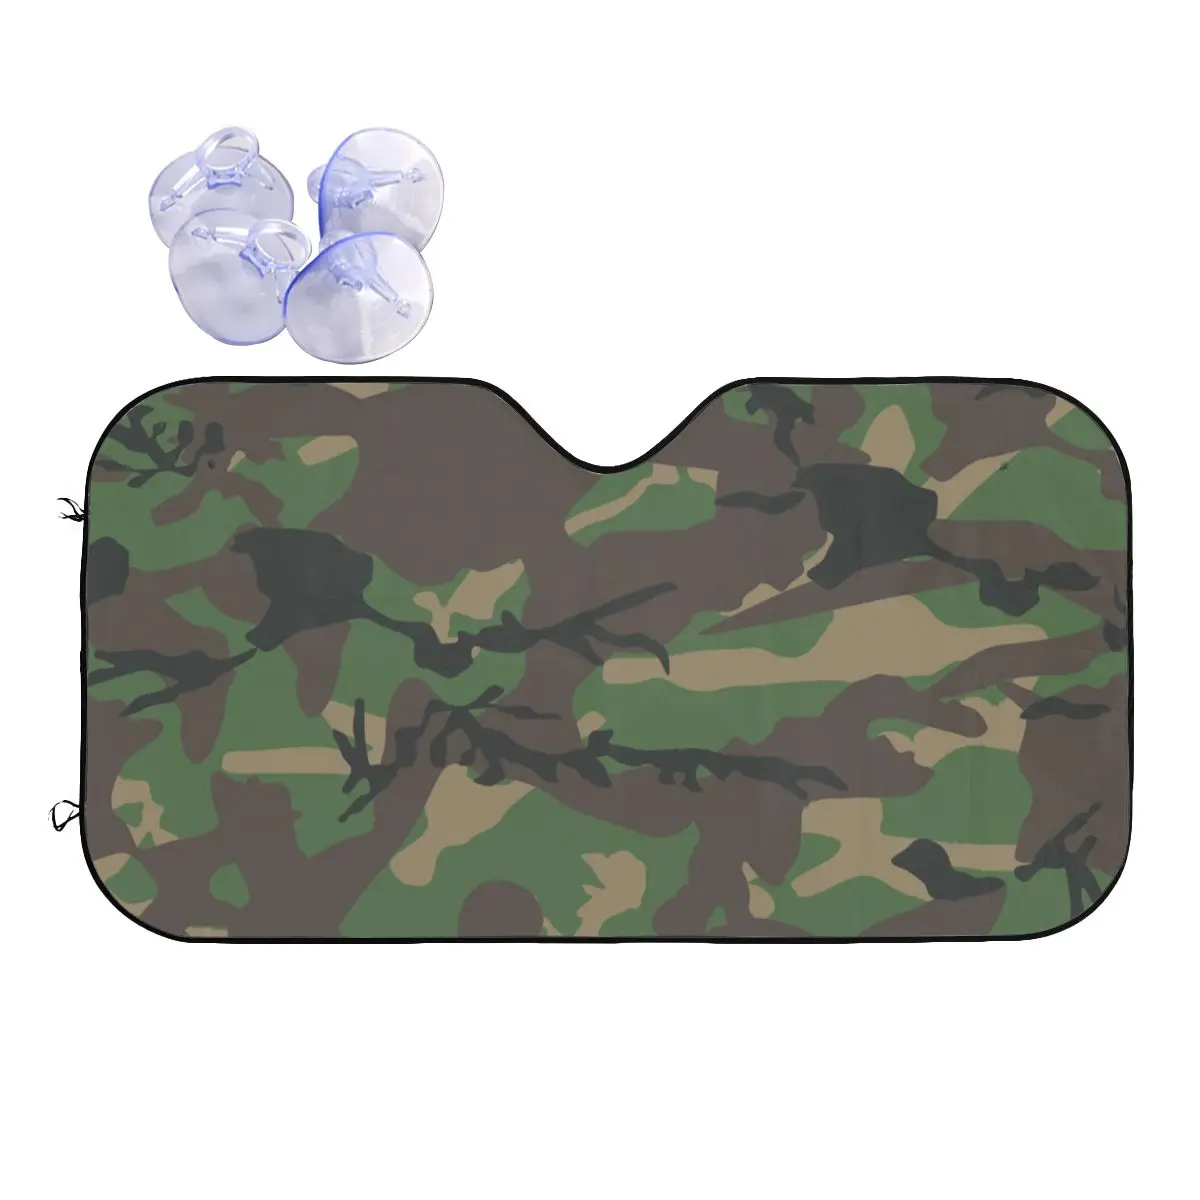 

Jungle Camouflage Windshield Sunshade Army Military Camo Creative Cover Front Block Window Car Sunshade Accessories Covers